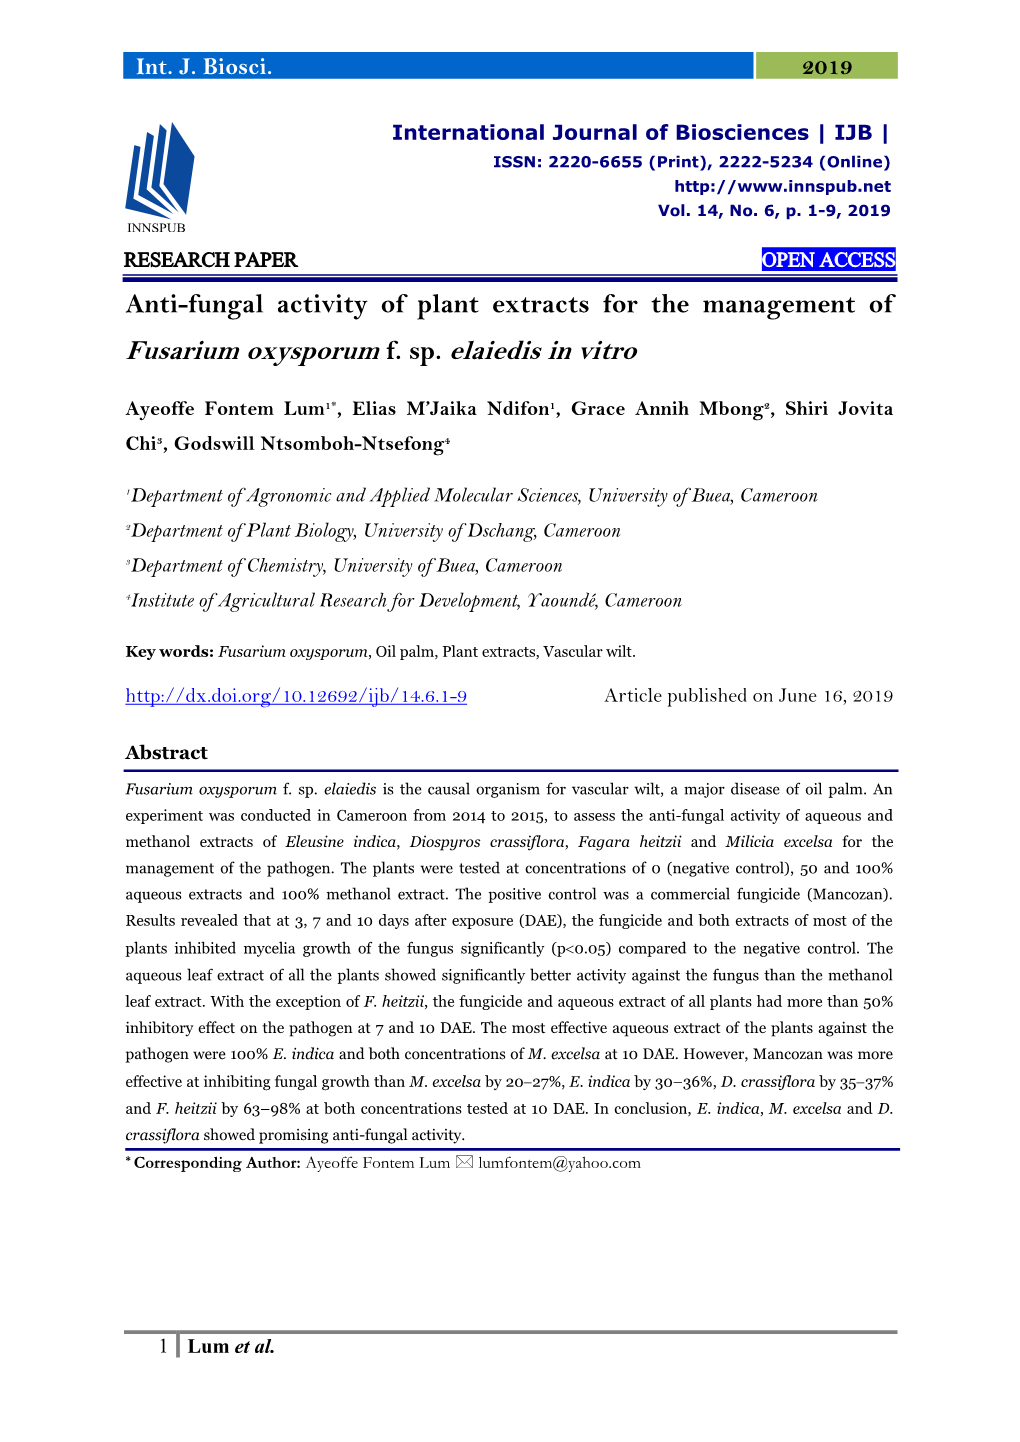 Anti-Fungal Activity of Plant Extracts for the Management of Fusarium Oxysporum F